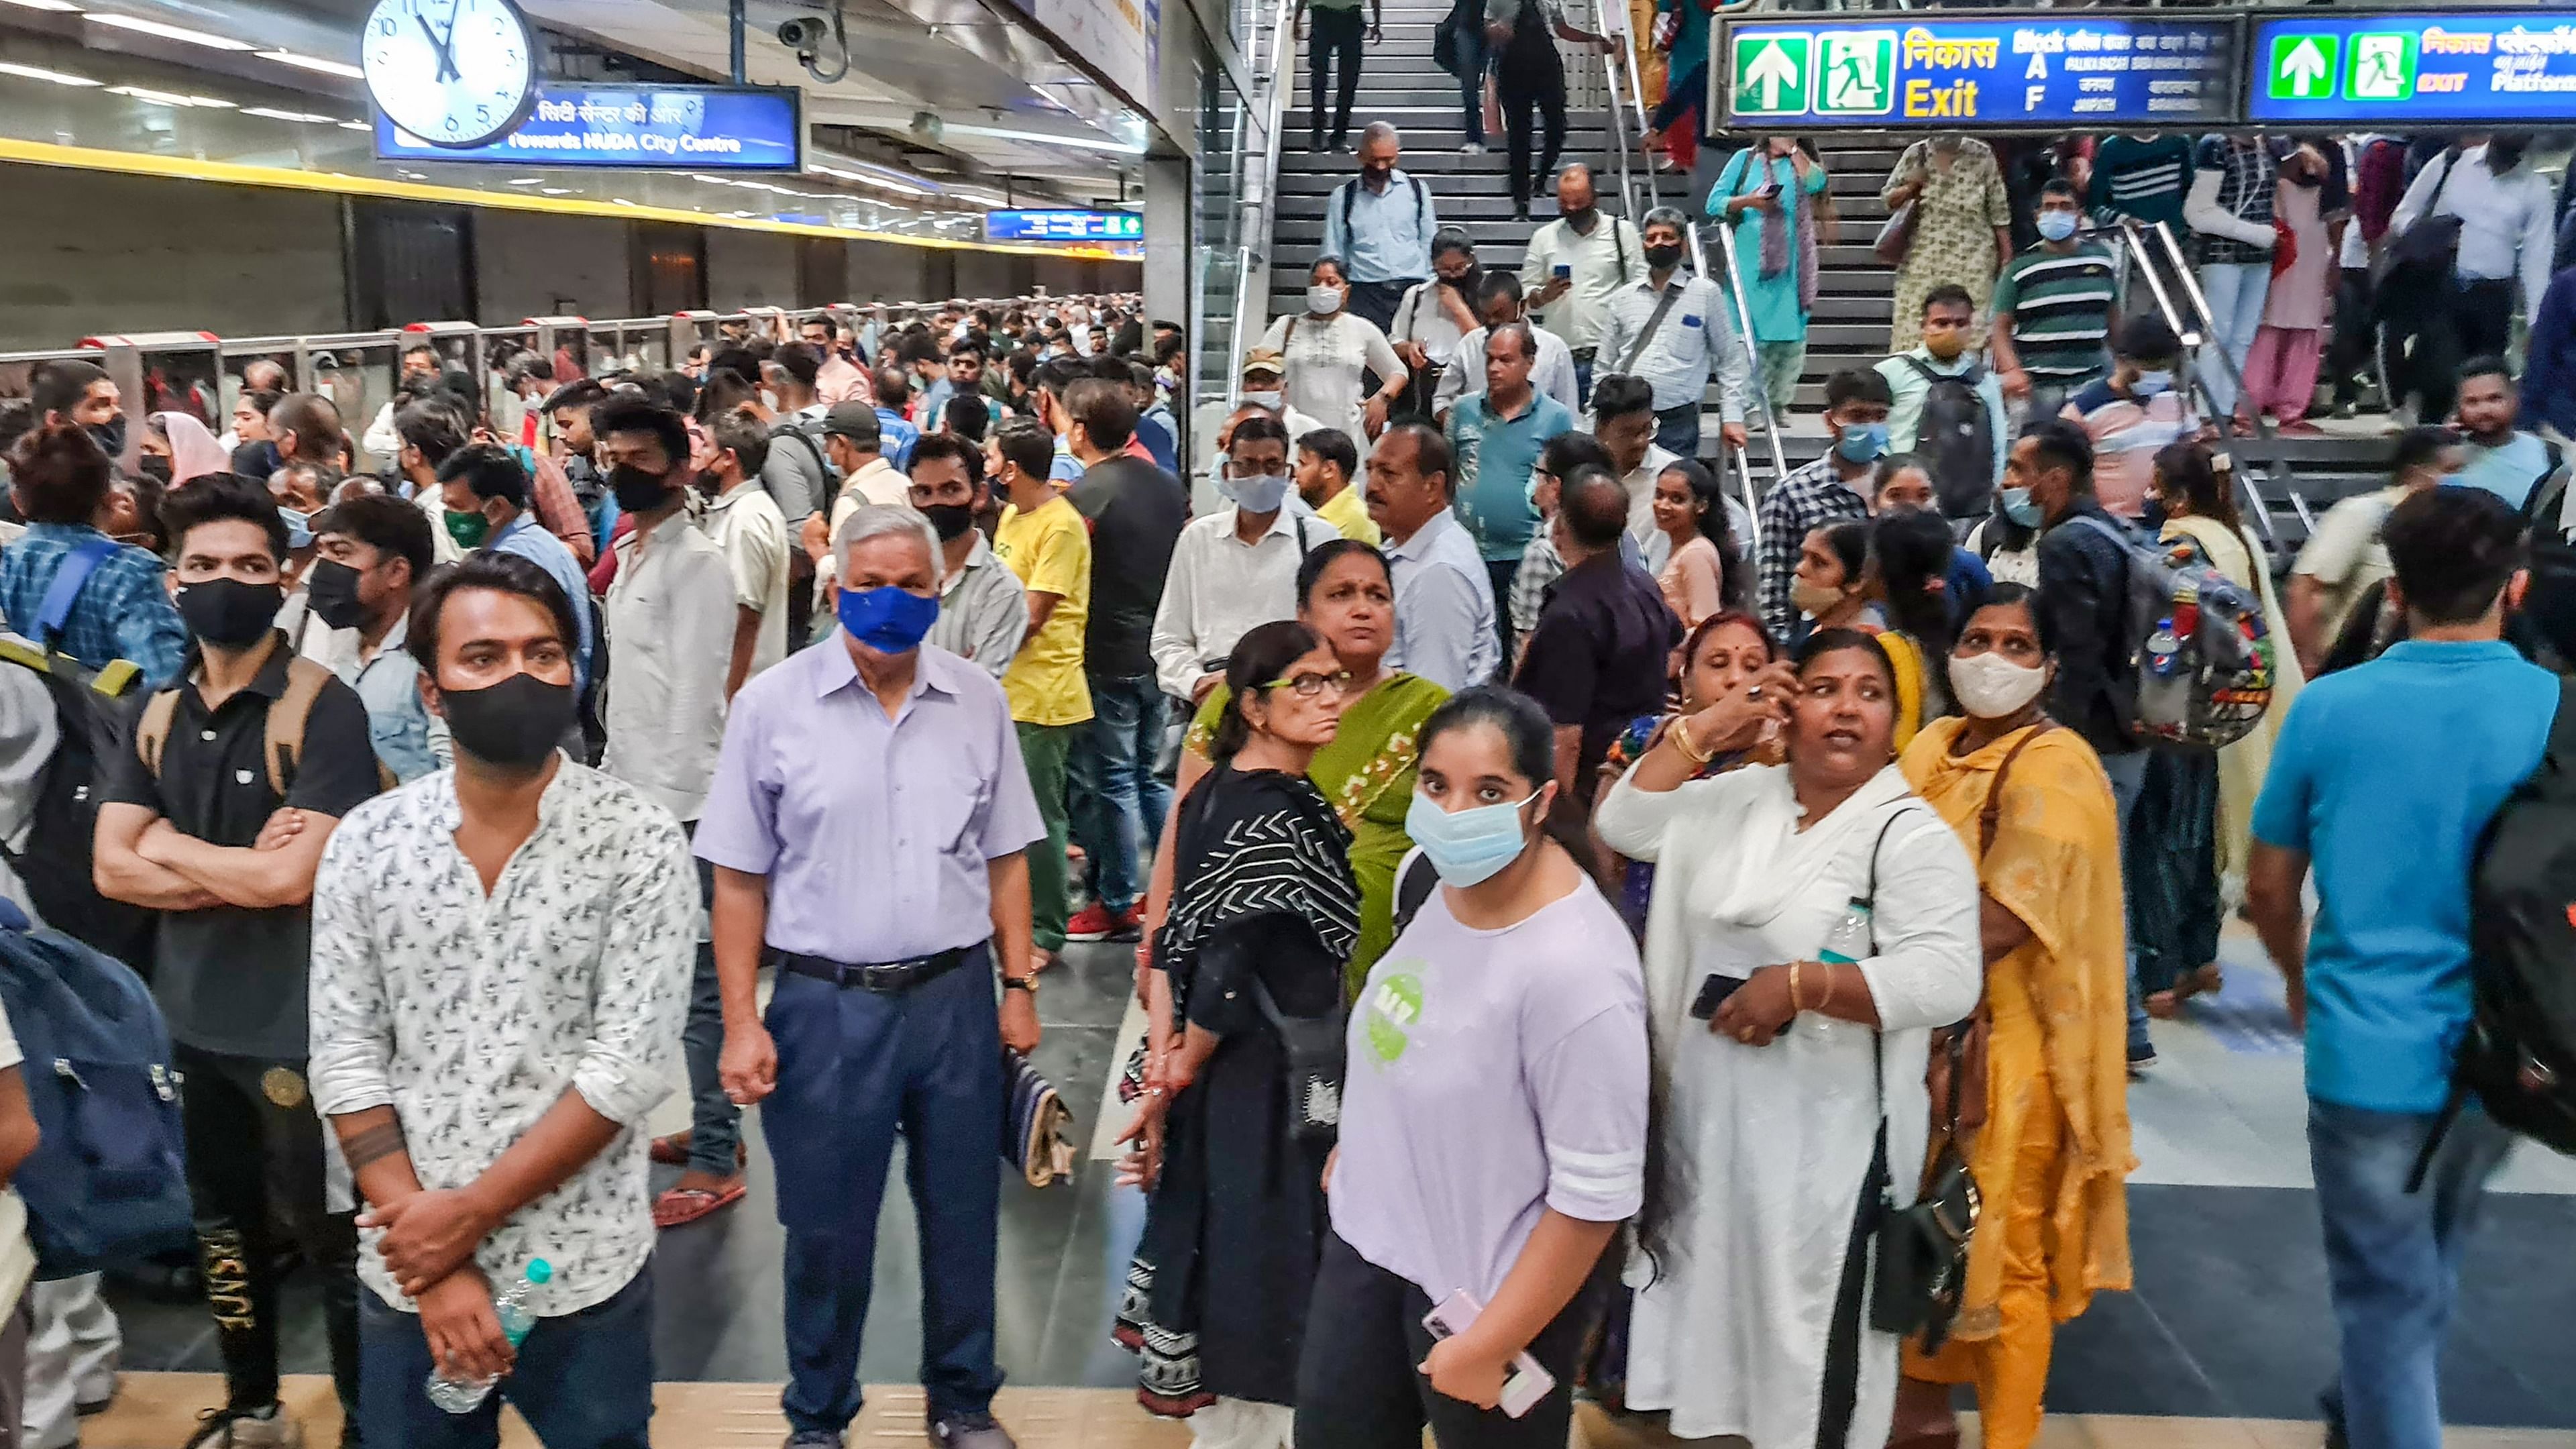 In line with the Delhi Disaster Management Authority (DDMA) guidelines, police impose a fine of Rs 500 on people violating the mask mandate. Credit: PTI photo